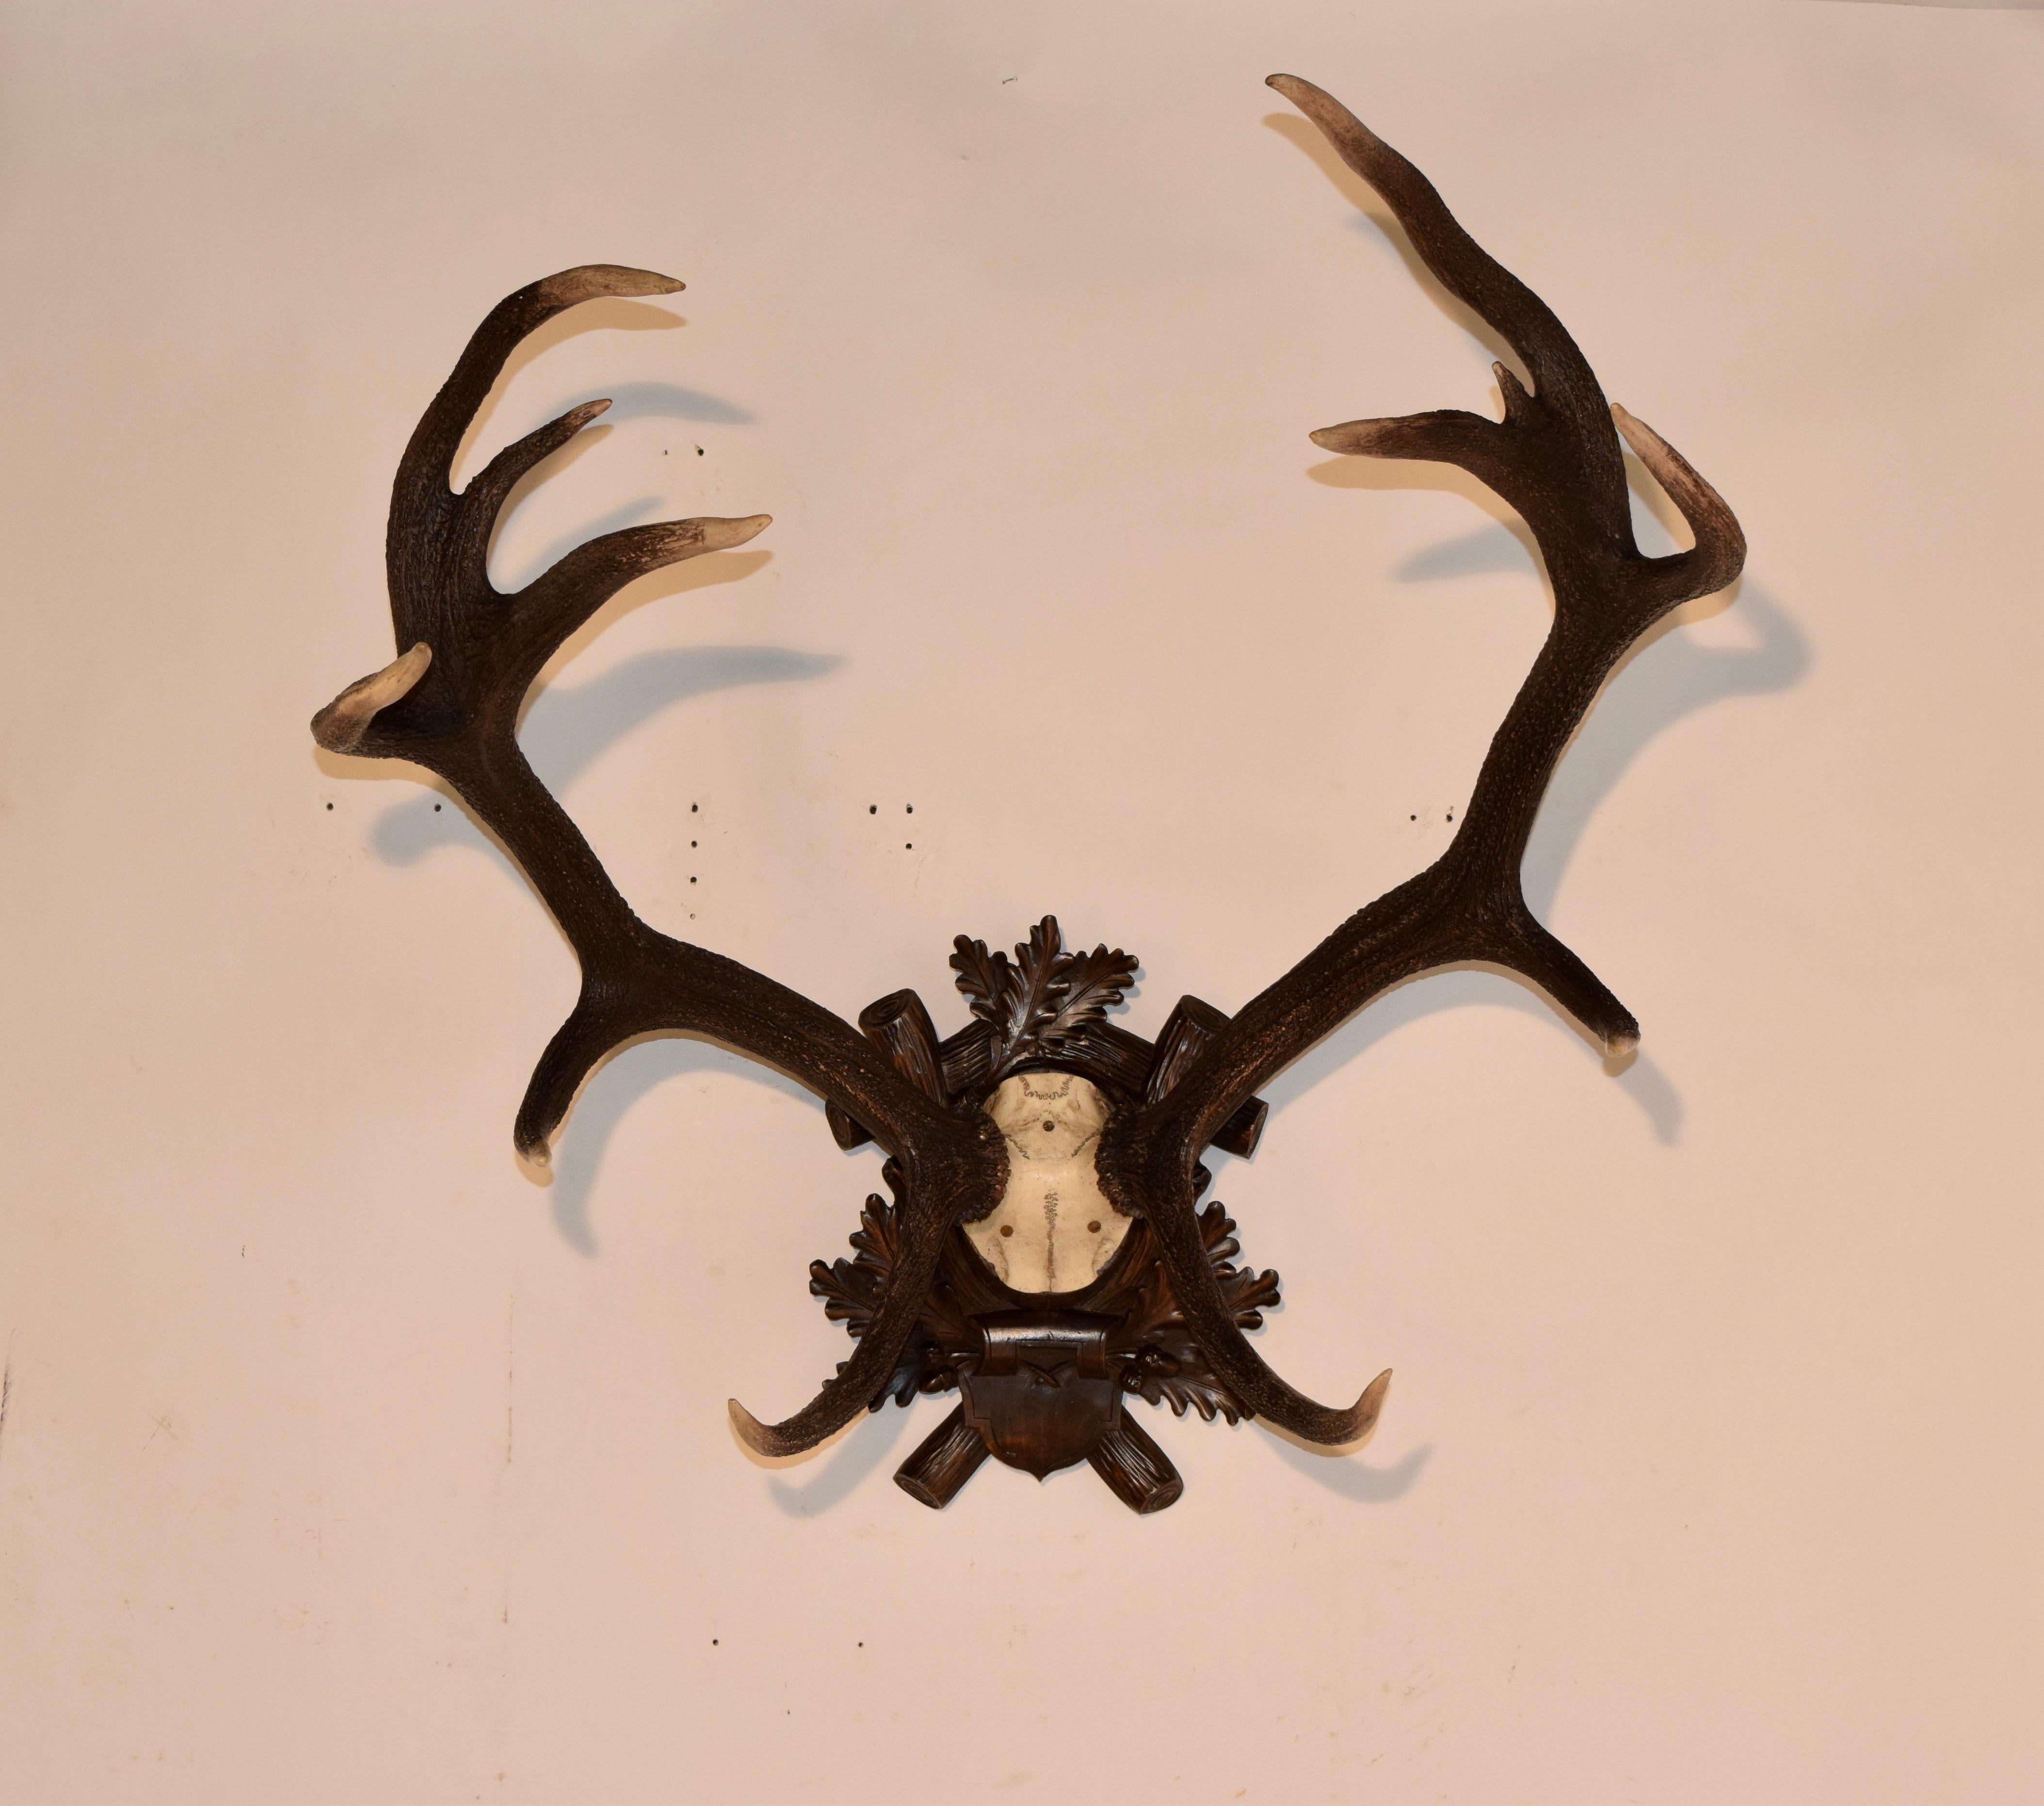 19th century set of atypical red stag antlers with 12 points mounted on a hand carved Black Forest plaque.